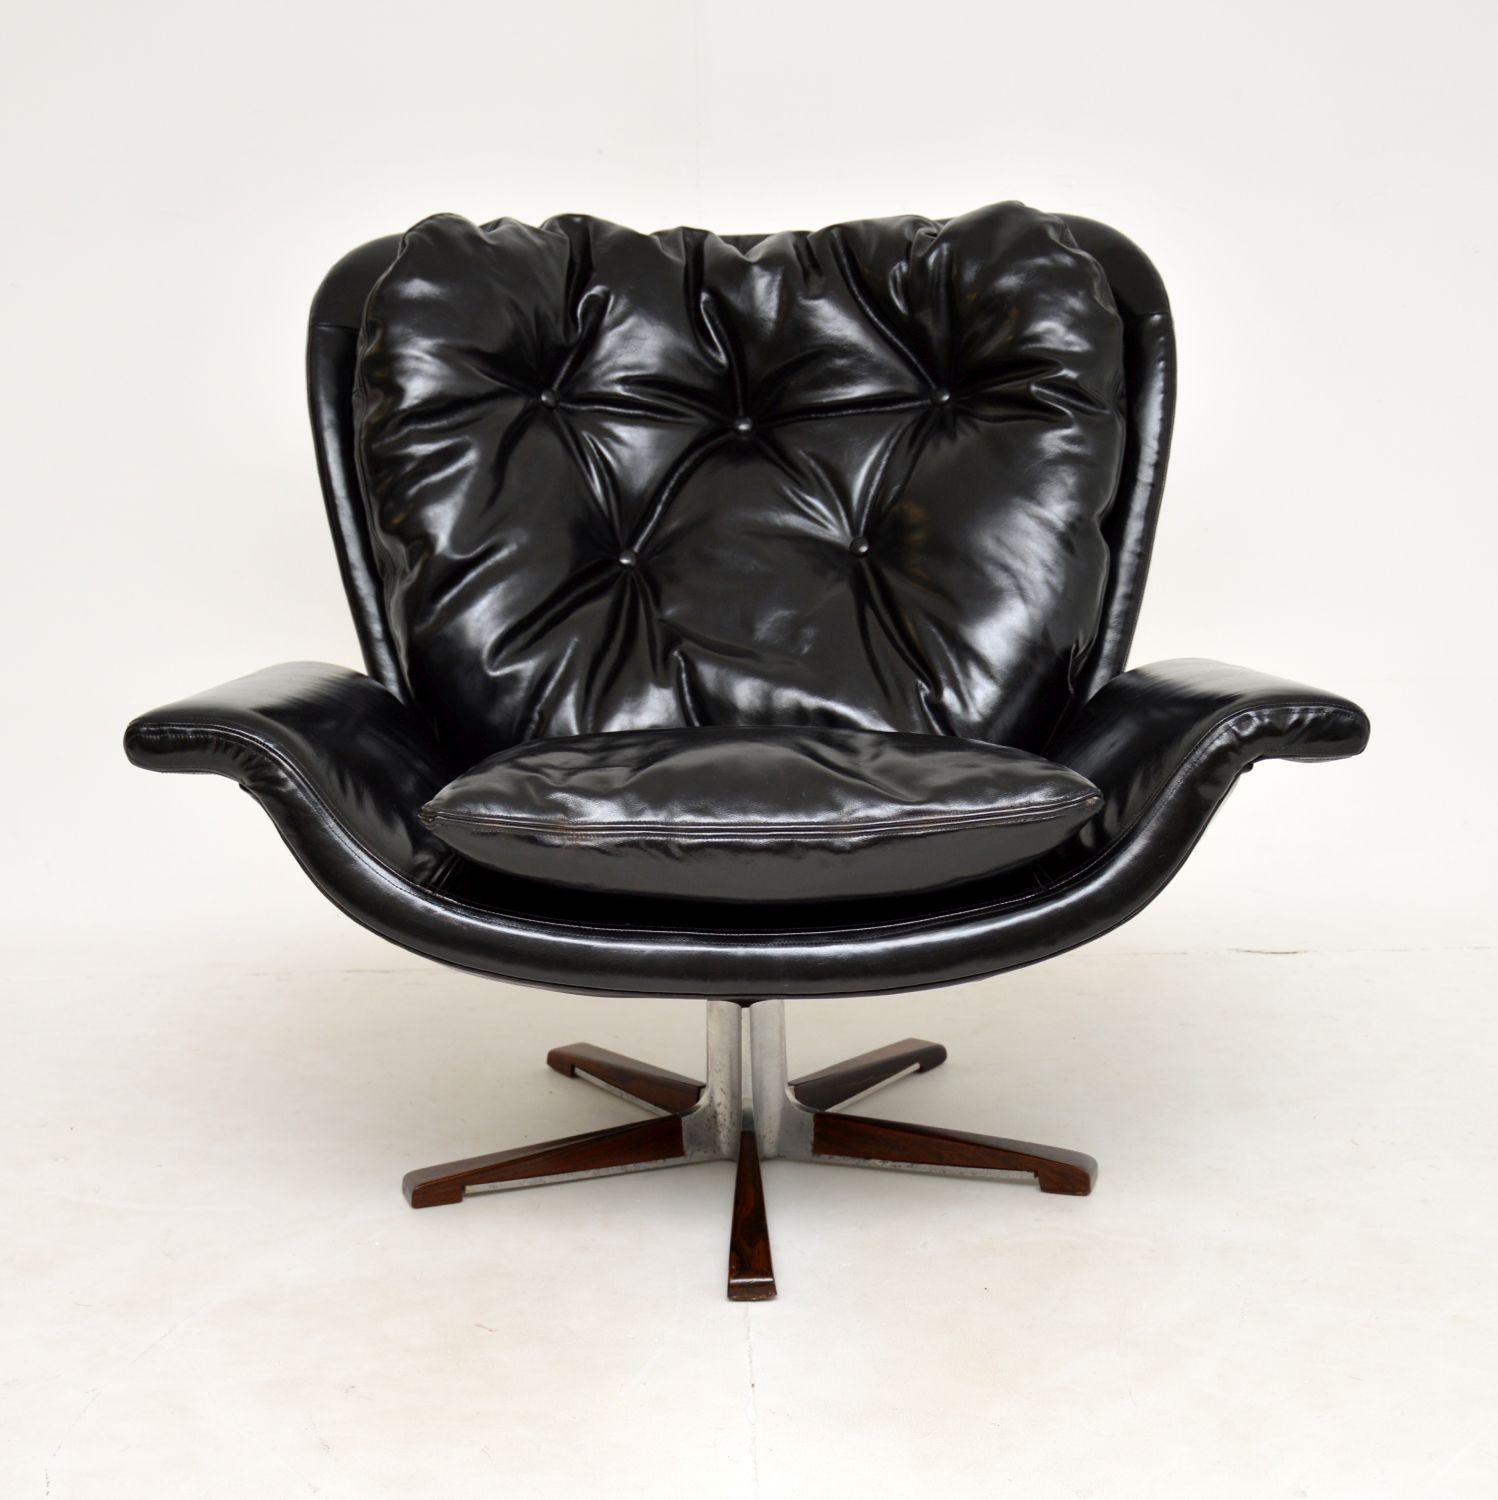 A magnificent vintage leather swivel armchair on a wood and steel base. We believe this was made in Denmark, it dates from around the 1960-1970’s.

The quality and design are incredible, this is up there with the best vintage armchairs you could